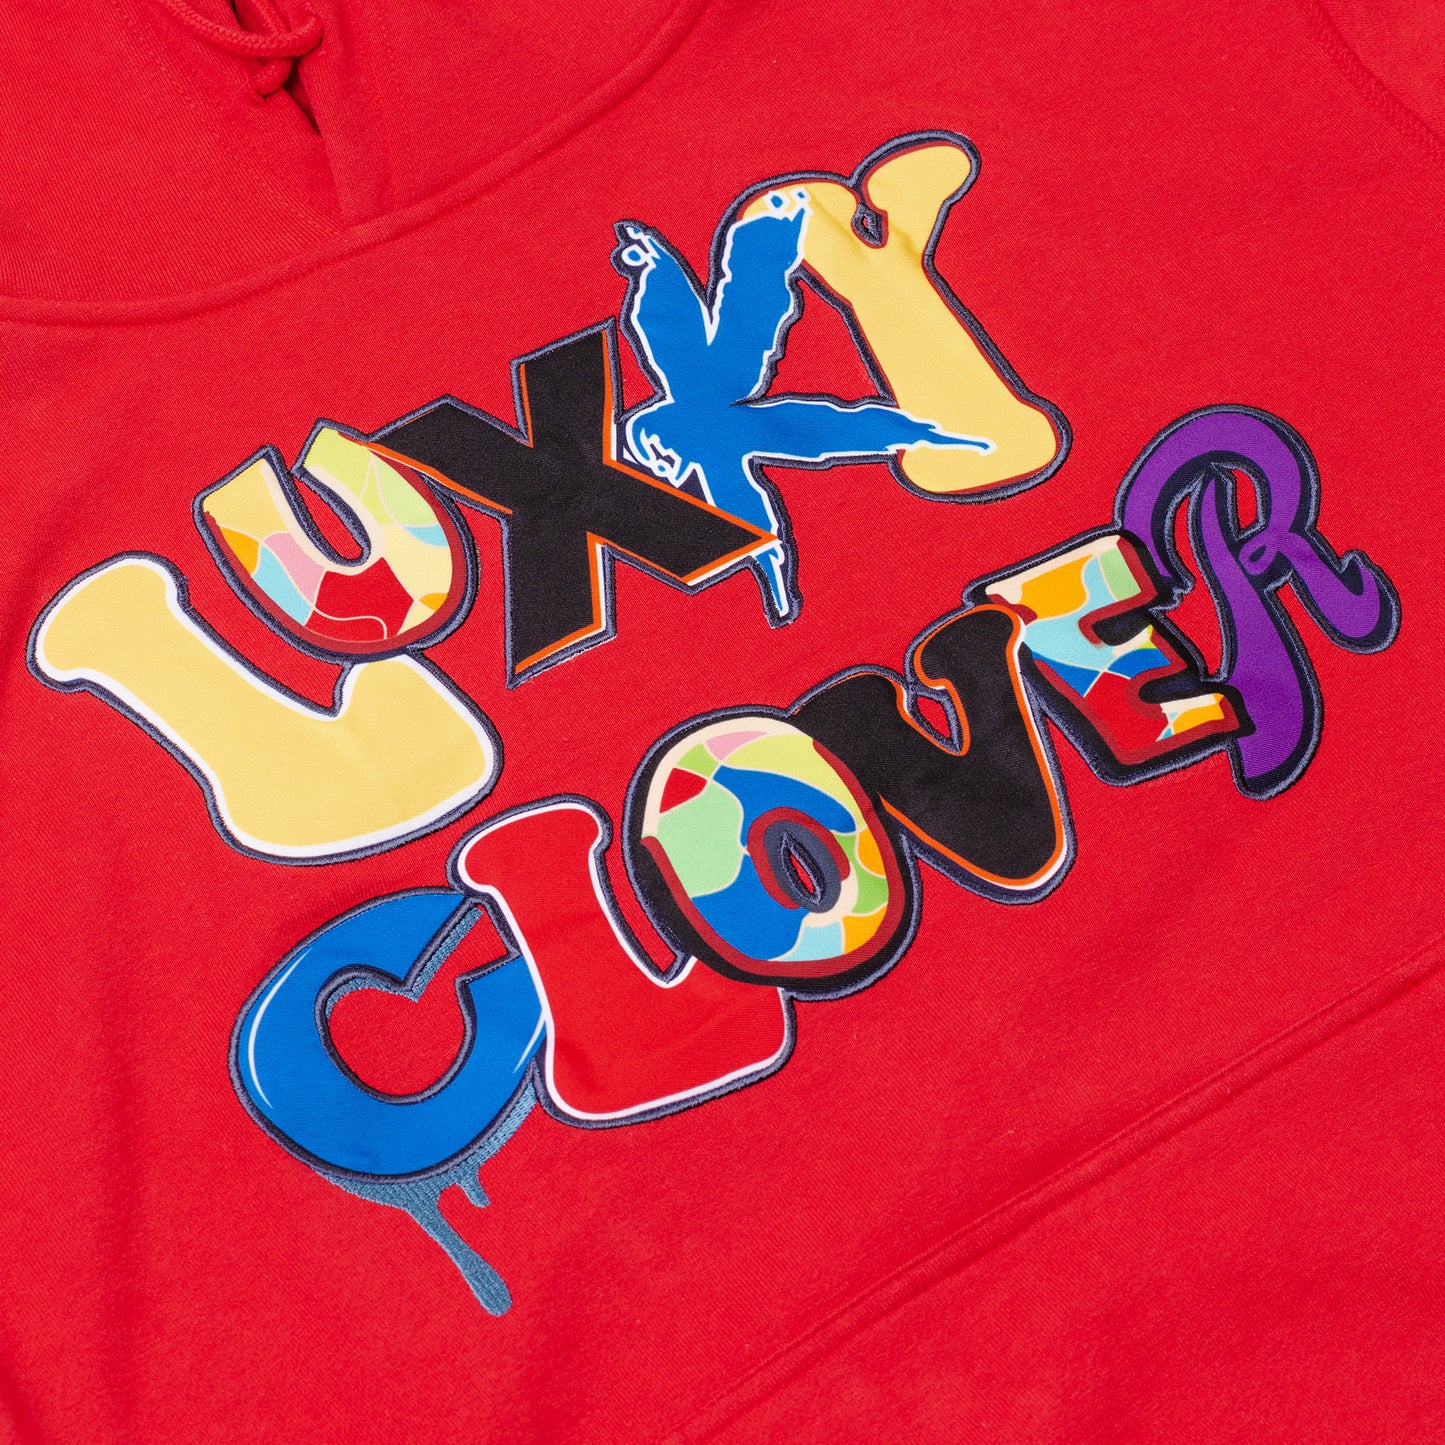 LUX CLOVER HOODIE - RED